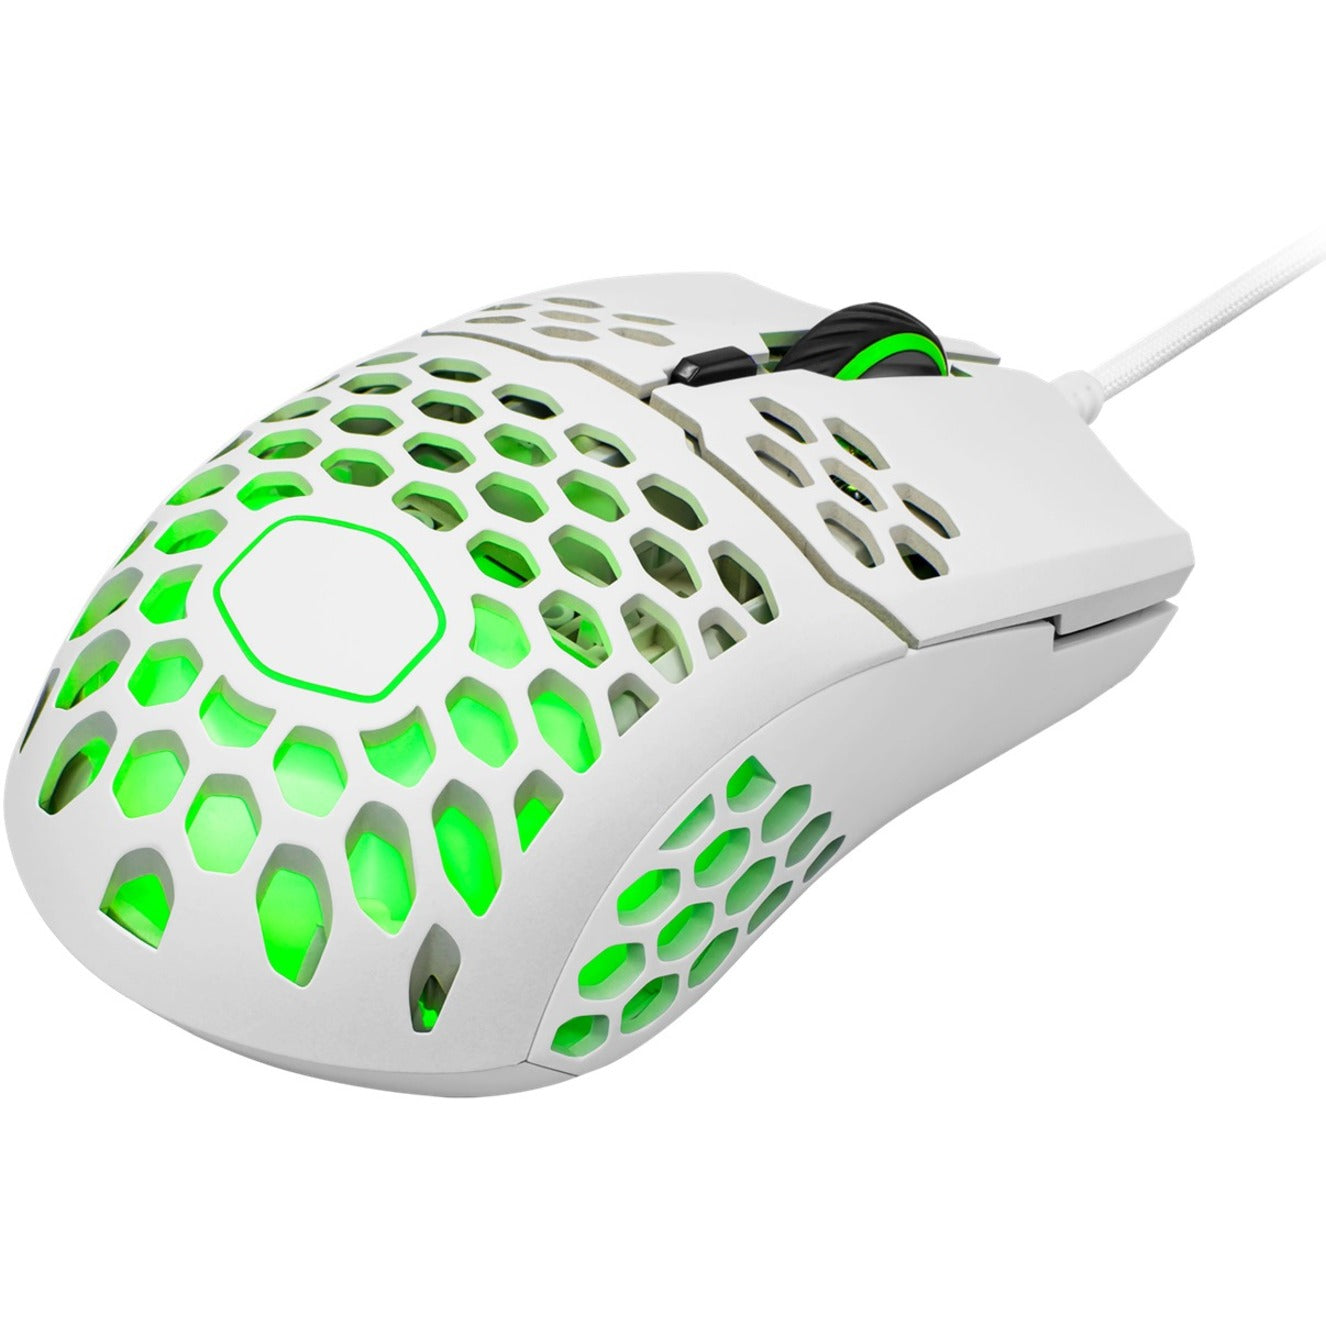 Cooler Master MM-711-WWOL1 MasterMouse MM711 Gaming Mouse, Ergonomic Fit, 16000 dpi, 2 Year Warranty